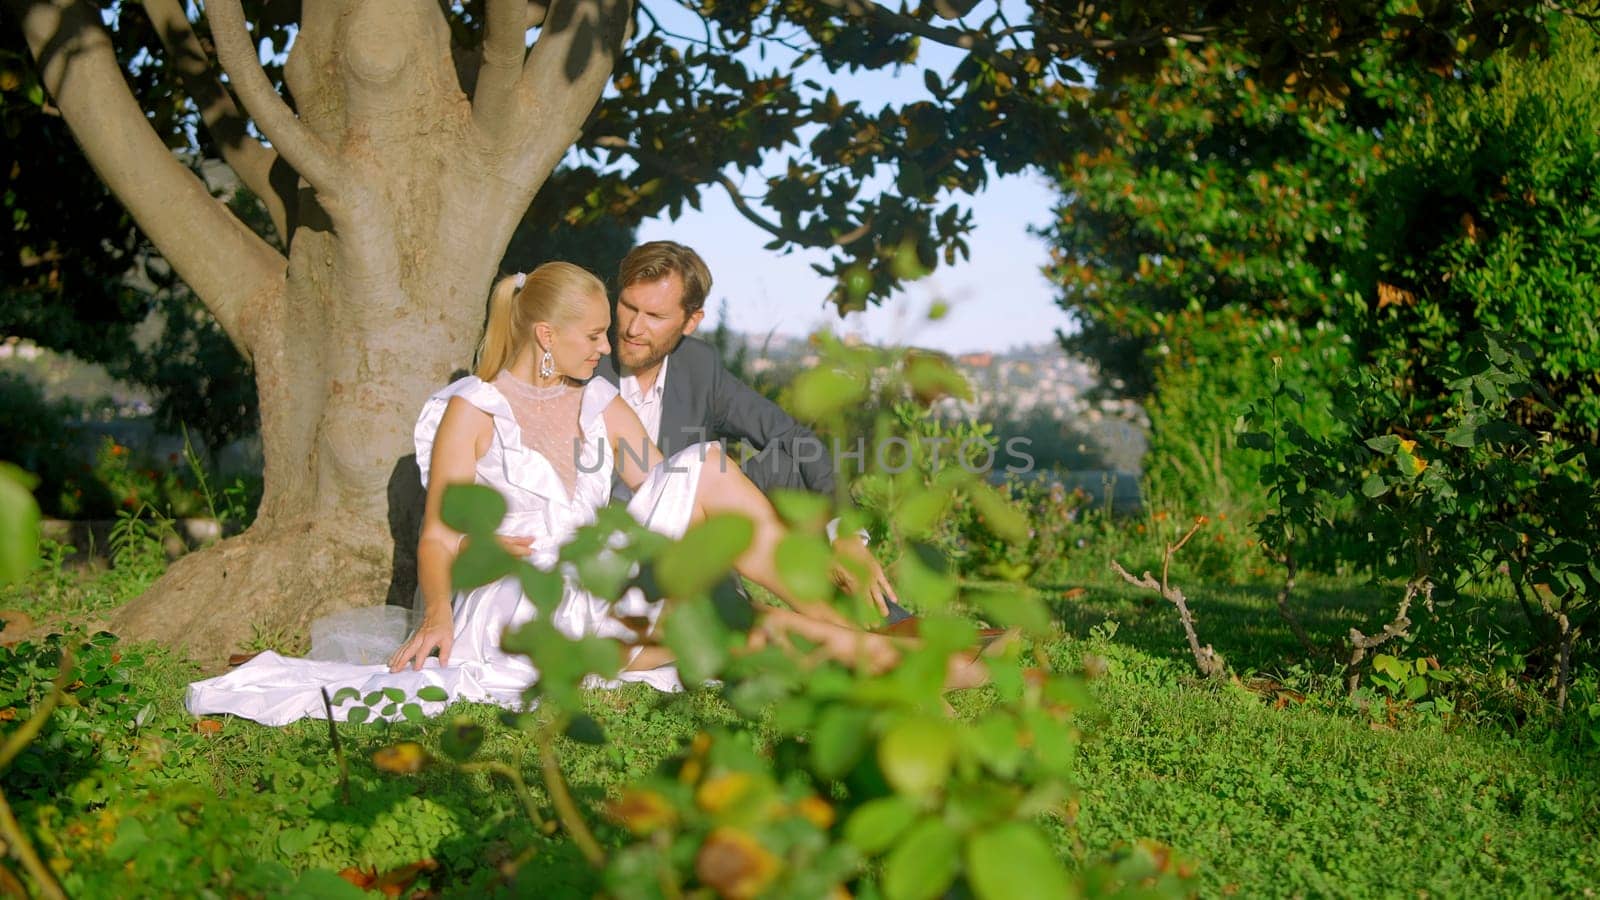 The bride and groom sitting by the tree trunk and hugging in the park. Action. Concept of romance and love, wedding traditions